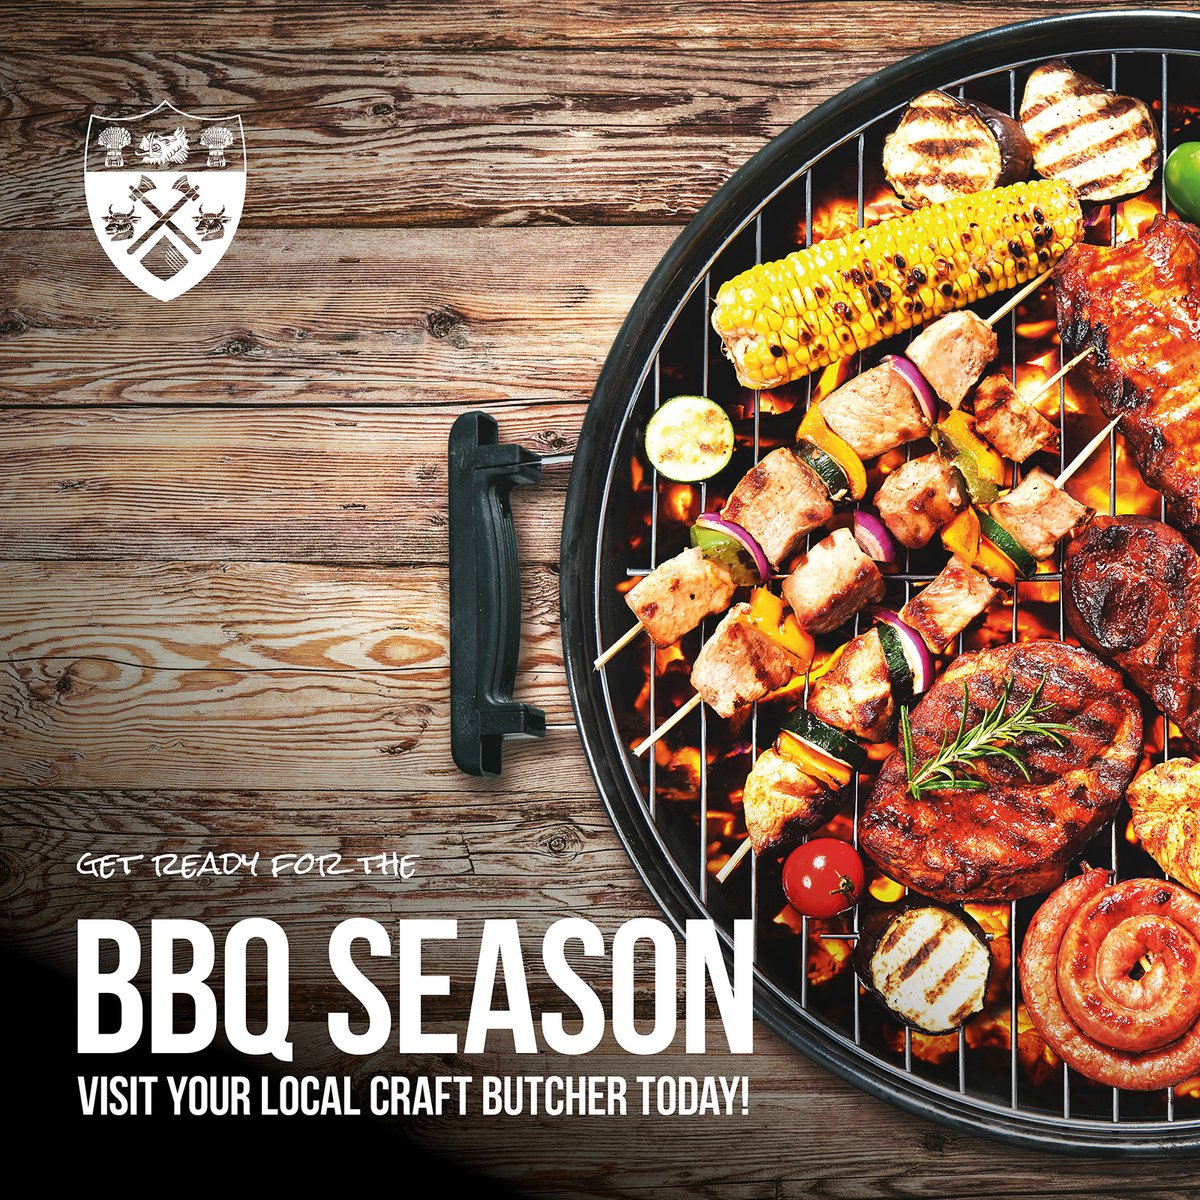 Promote BBQ week 3rd to 9th June using our digital marketing pack on your social channels and in your shop

💻 Log on to the members area to download your digital marketing pack ow.ly/8iZG50Rm8p7 

#NationalCraftButchers #Butchers #ButchersLife #ShopLocal #NationalBBQWeek